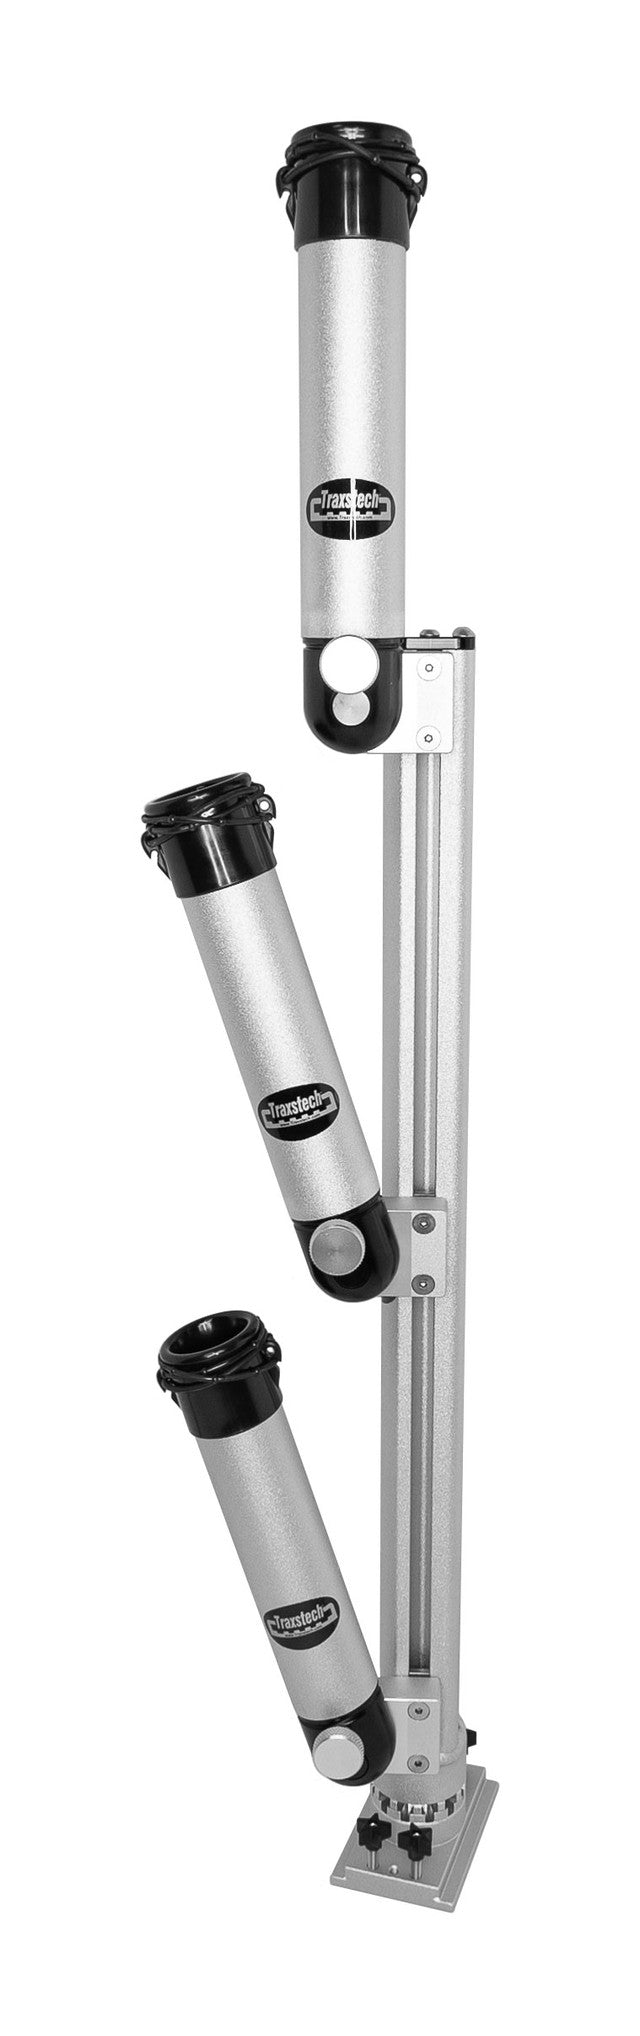 Traxstech Vertical Rod Tree with 3 Rod Holders Part #VBT3